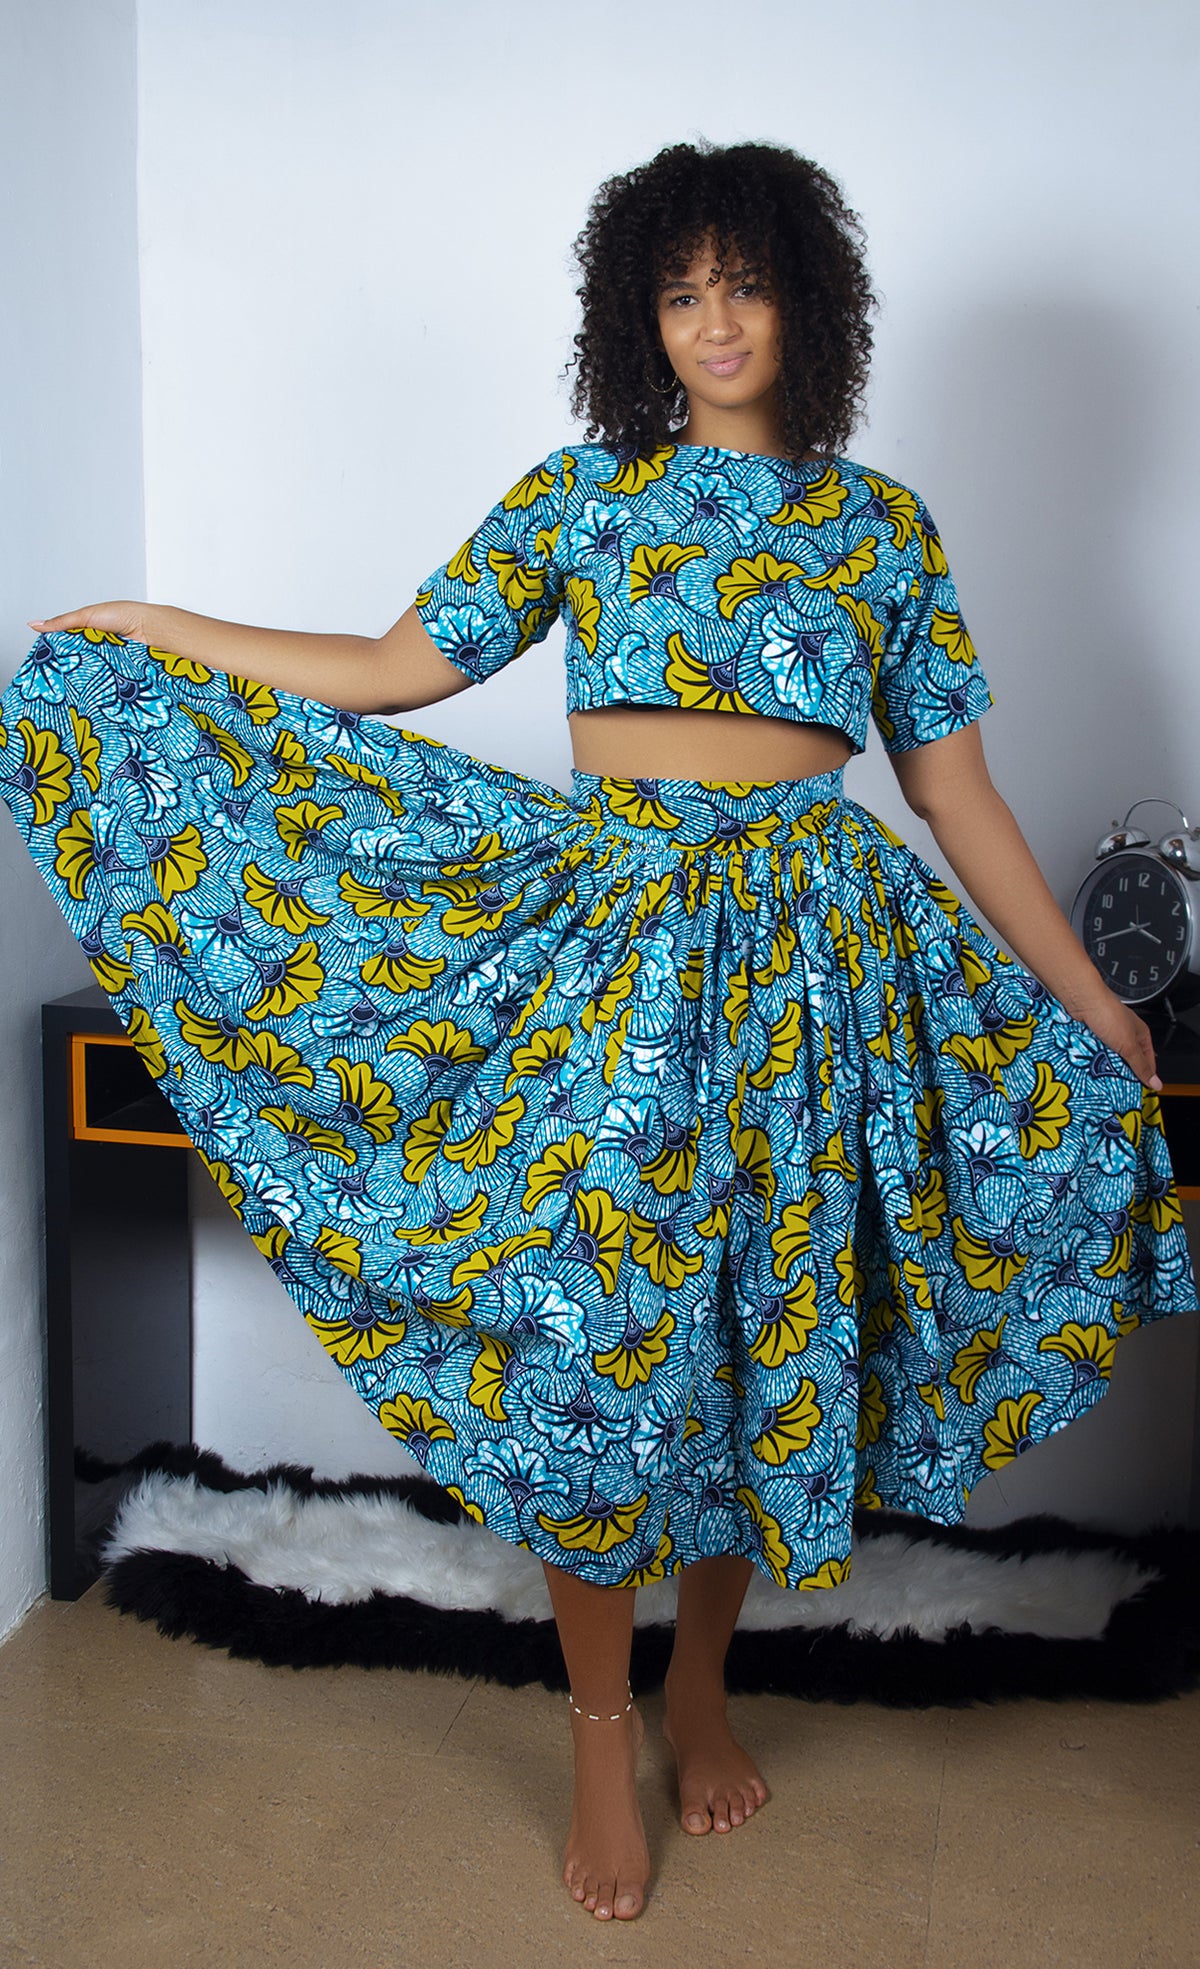 Denim And African Print Outfits | lupon.gov.ph